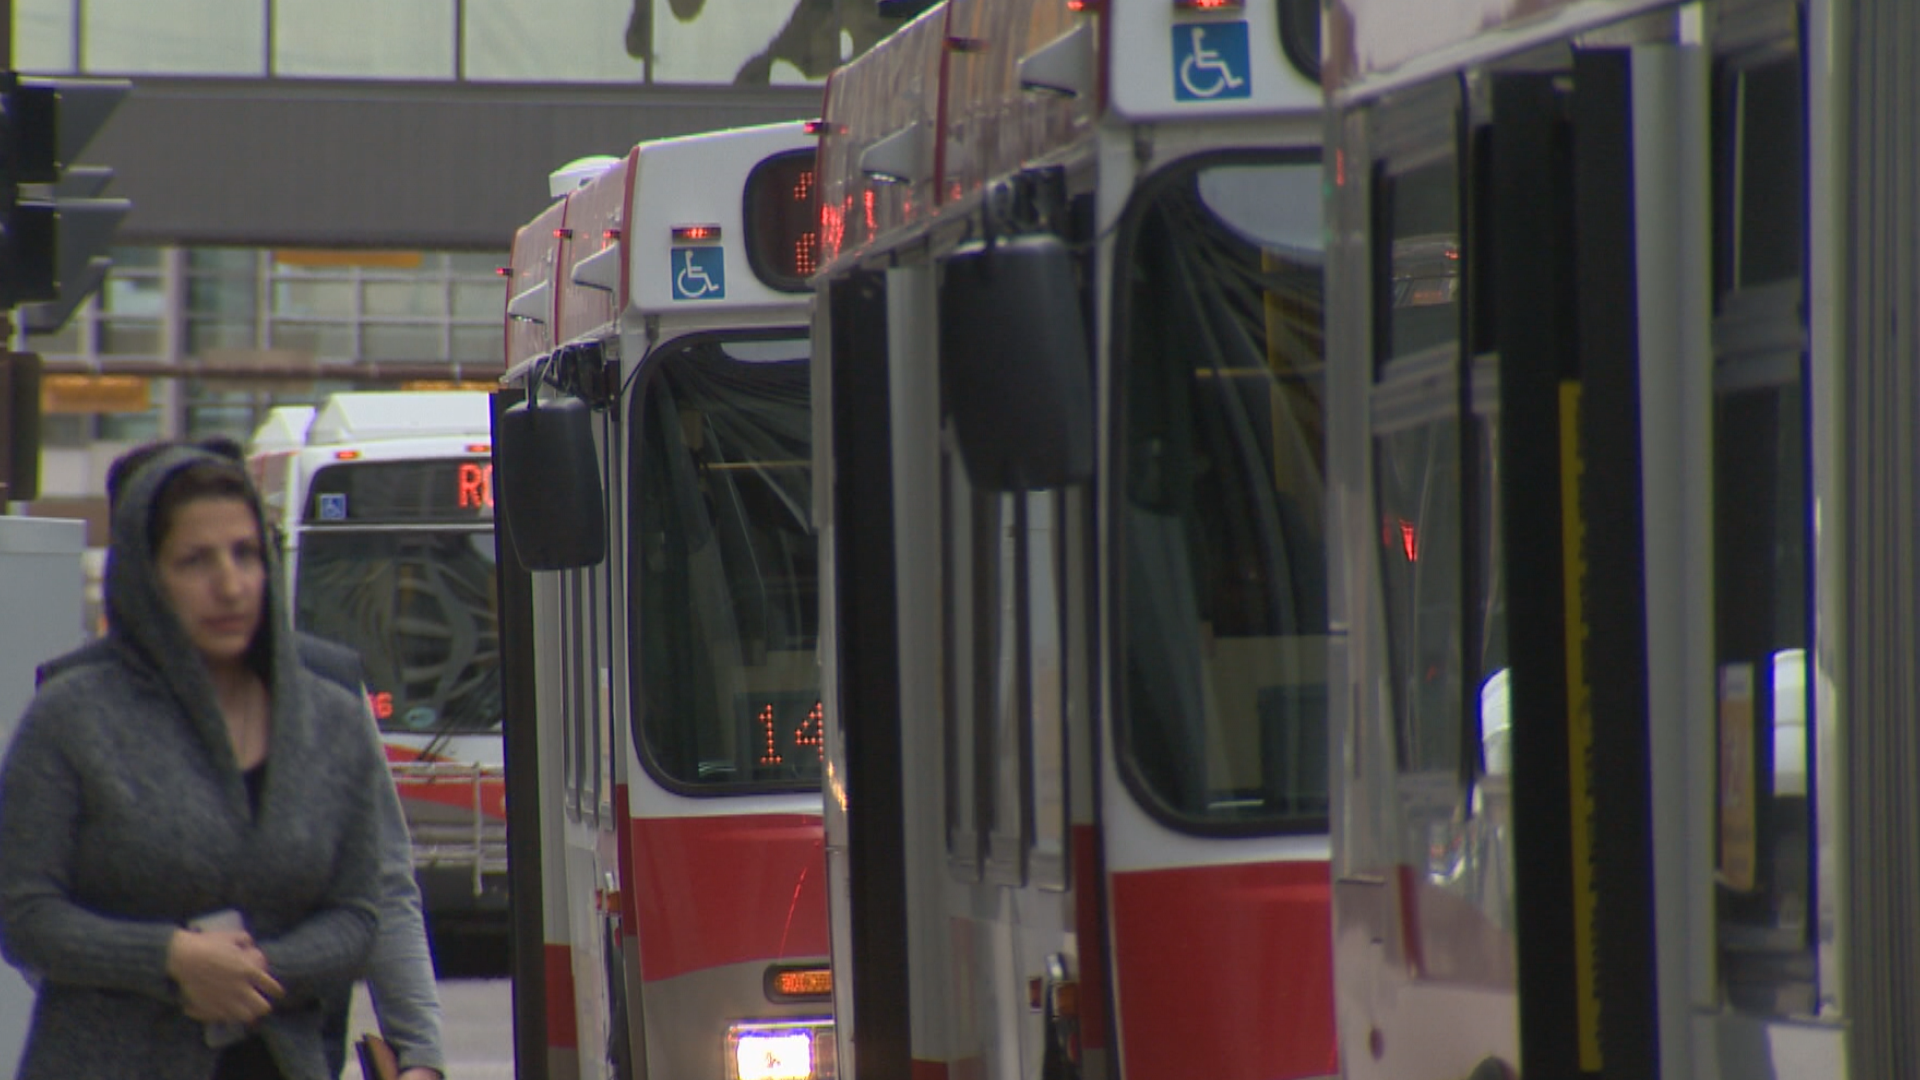 Calgary Transit’s RouteAhead plan to cost more than $750M by 2034: memo